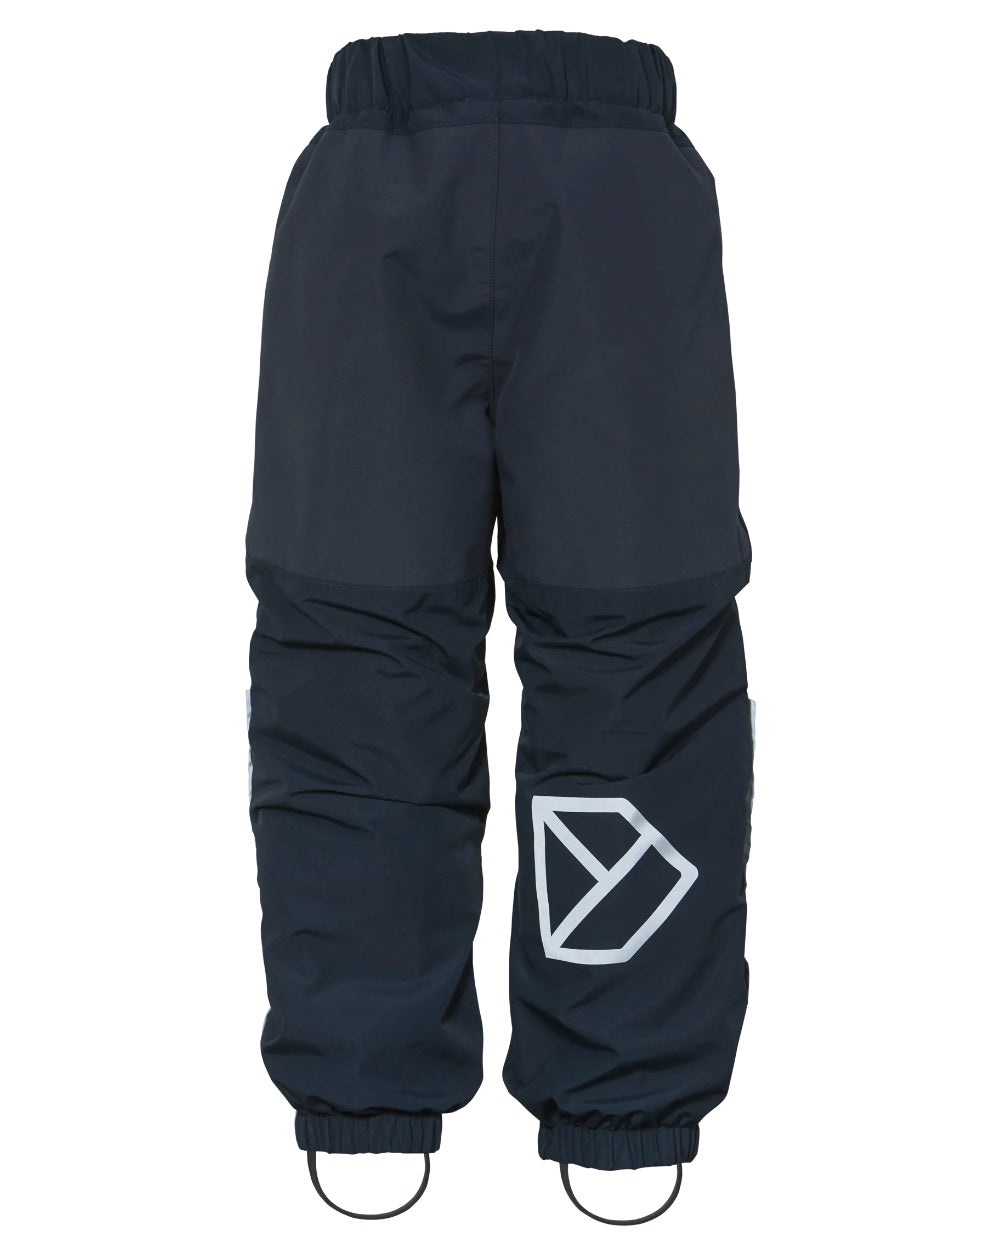 Navy Coloured Didriksons Narvi Childrens Pant On A White Background 